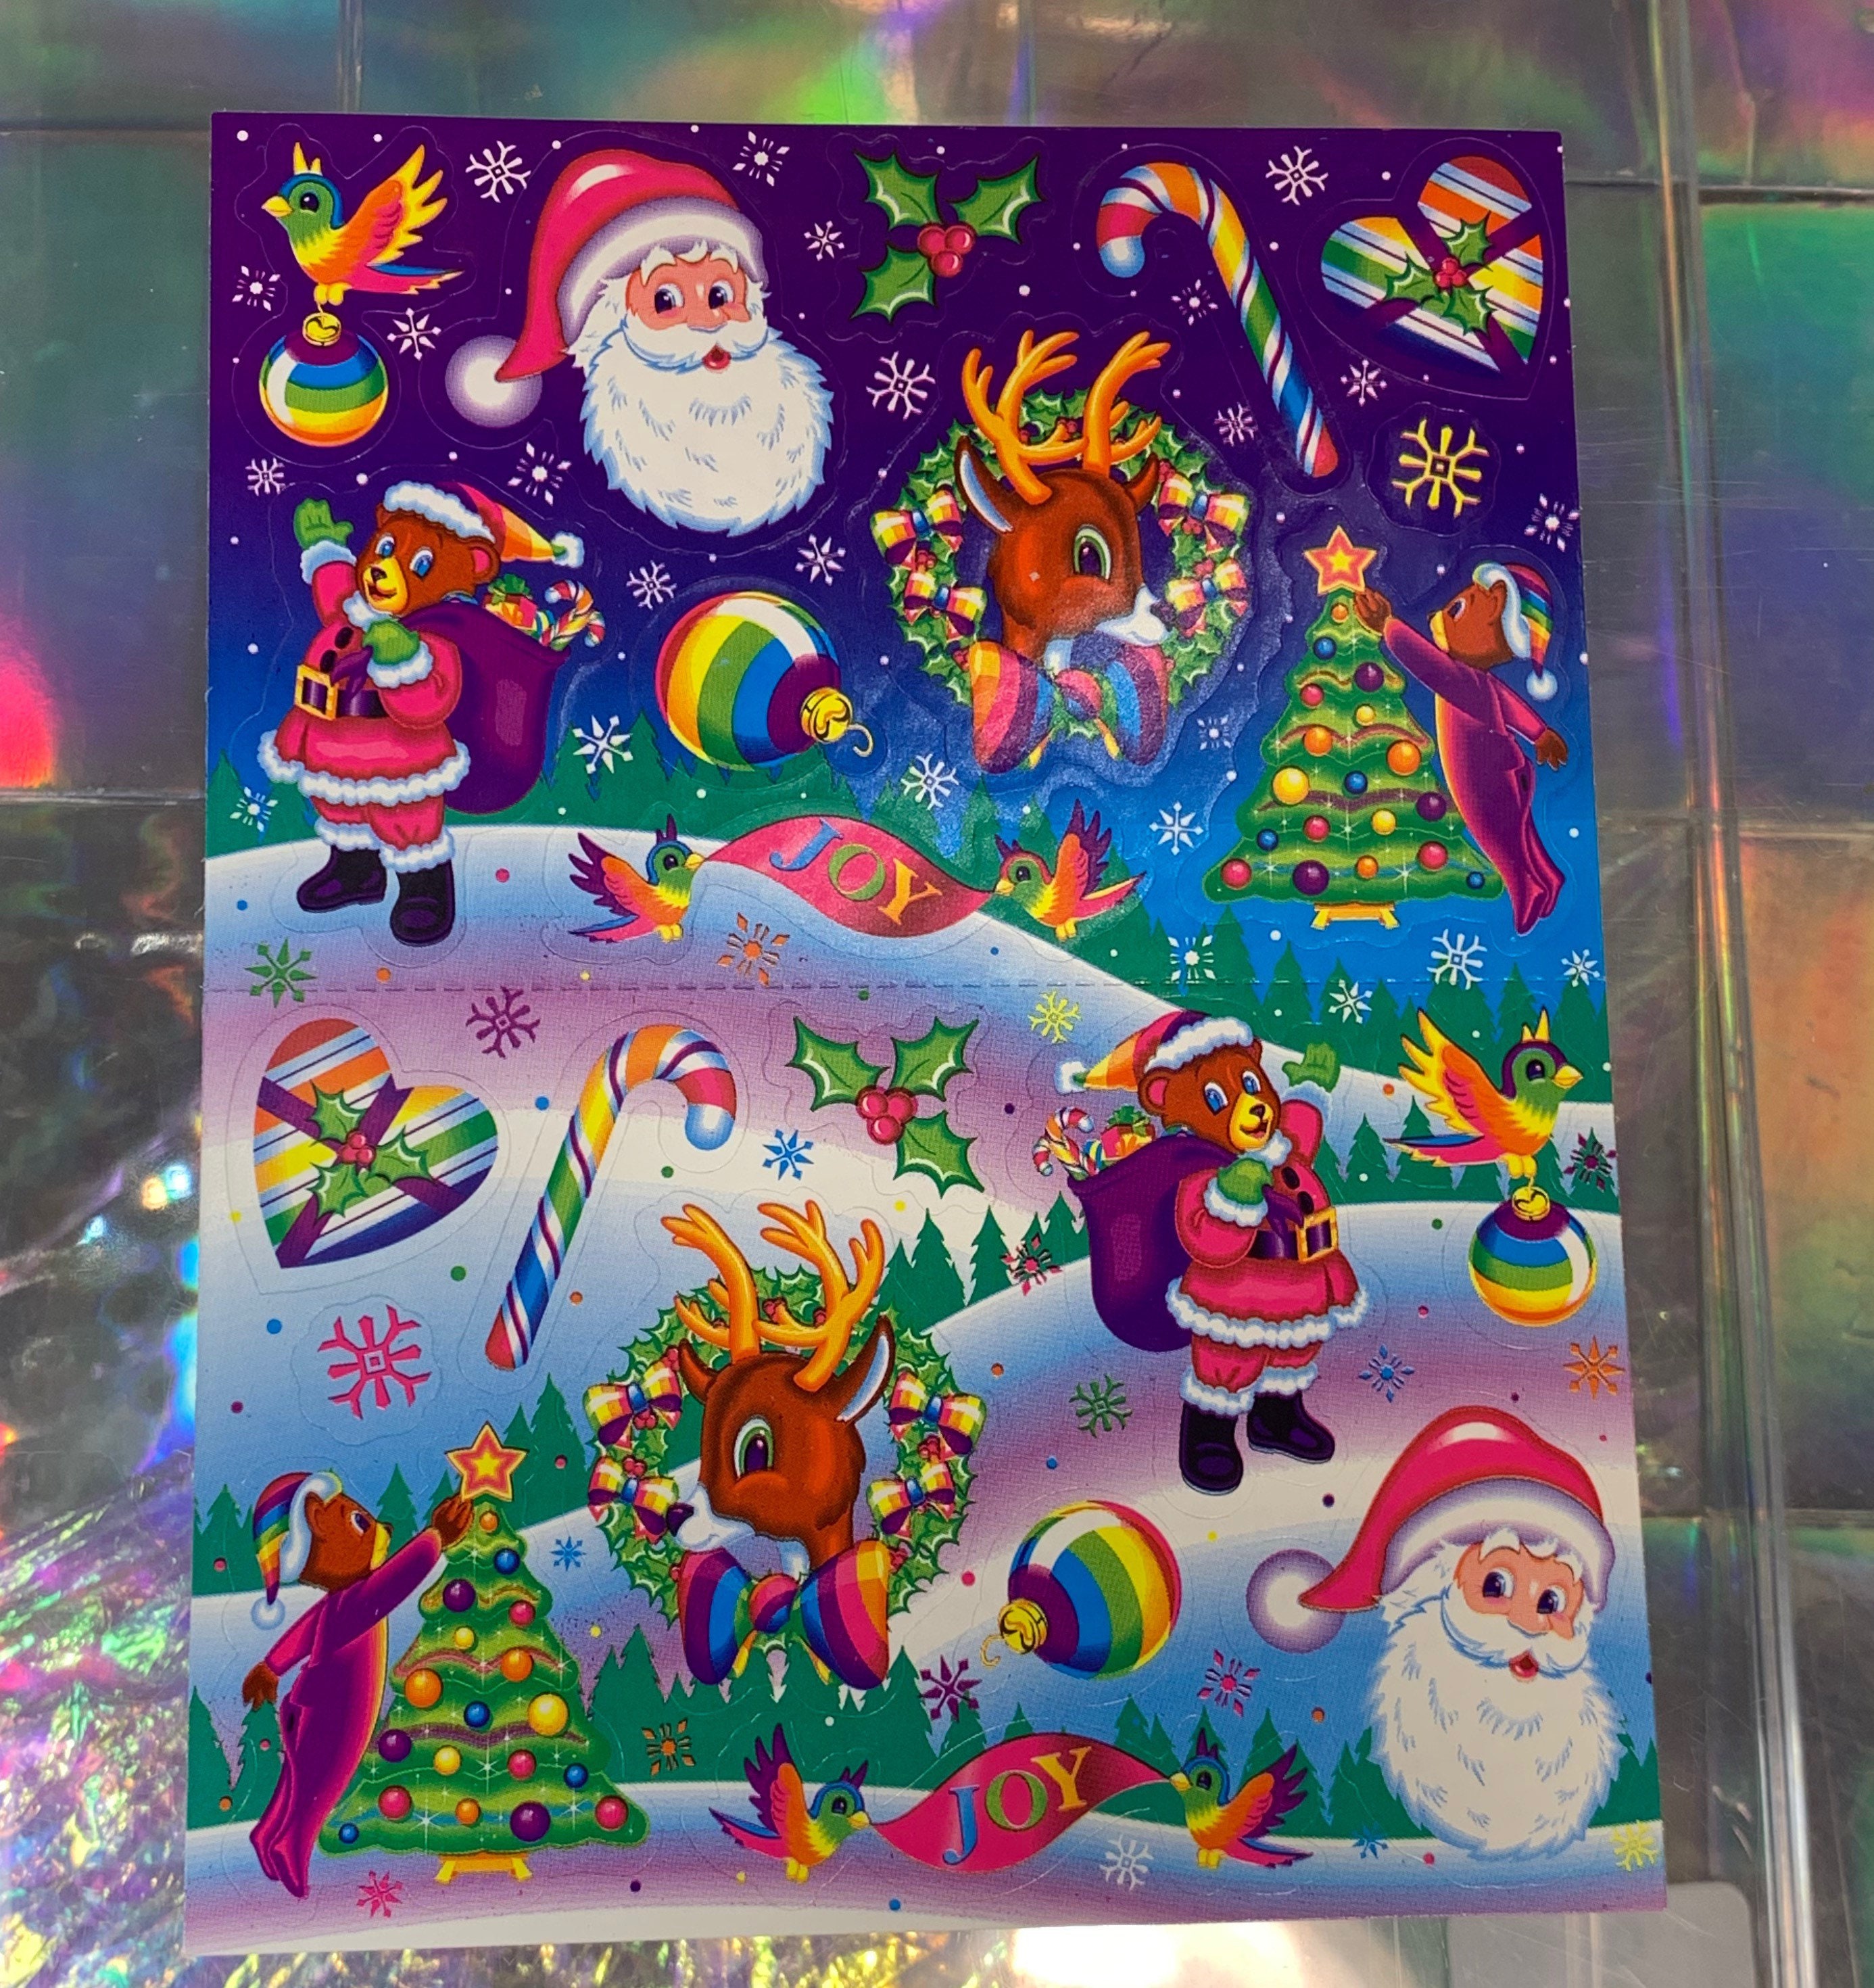 Lisa Frank - It's your last day to save the Lisa Frank sticker